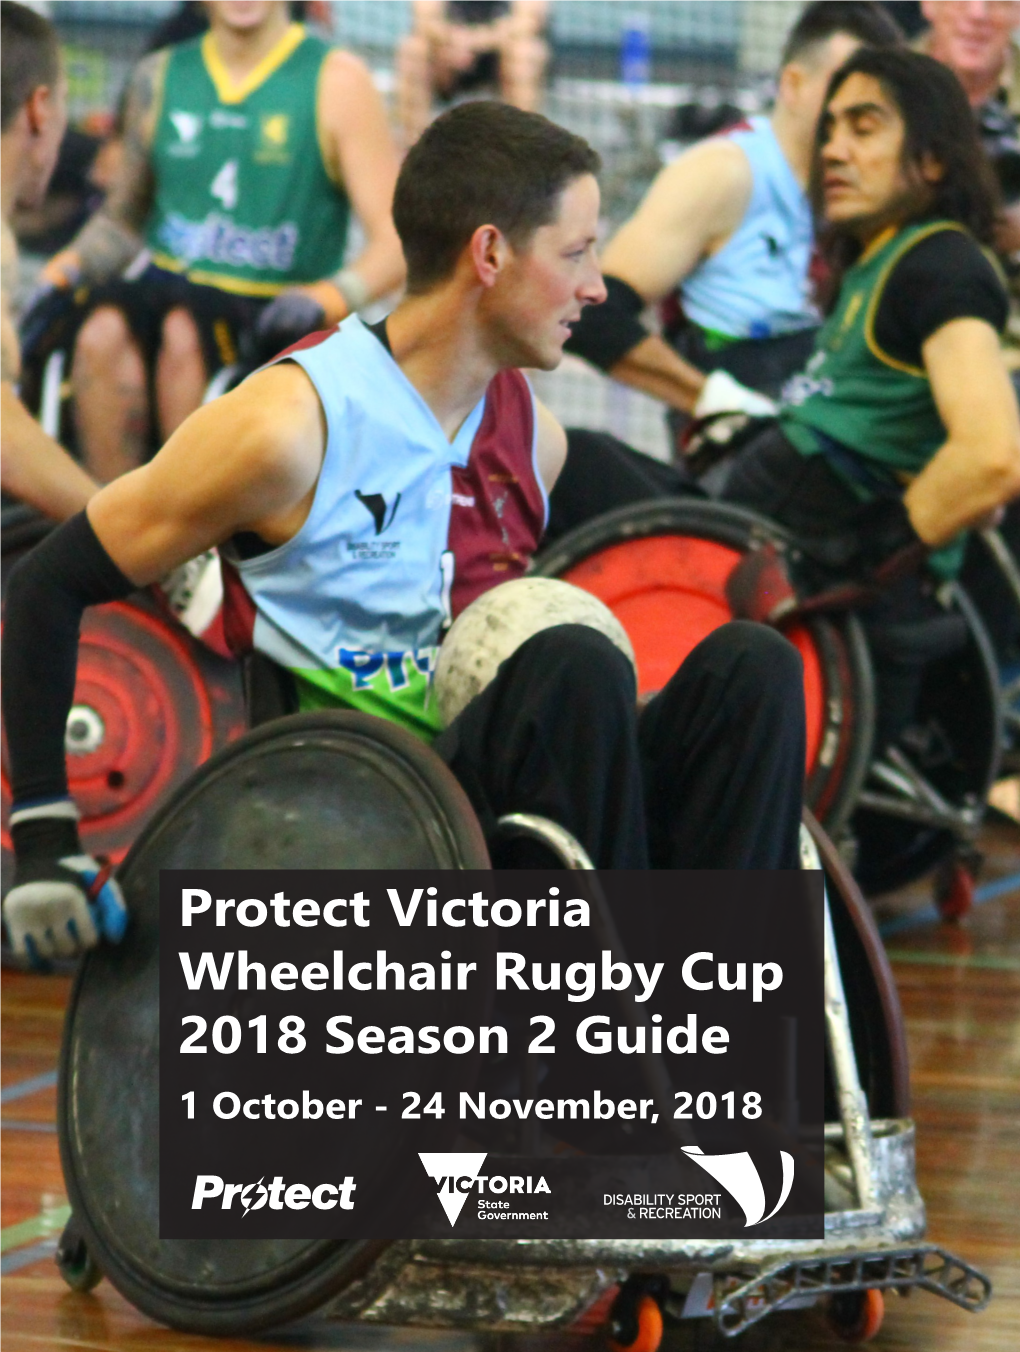 2018 Protect Victoria Wheelchair Rugby Cup Season 2 Guide